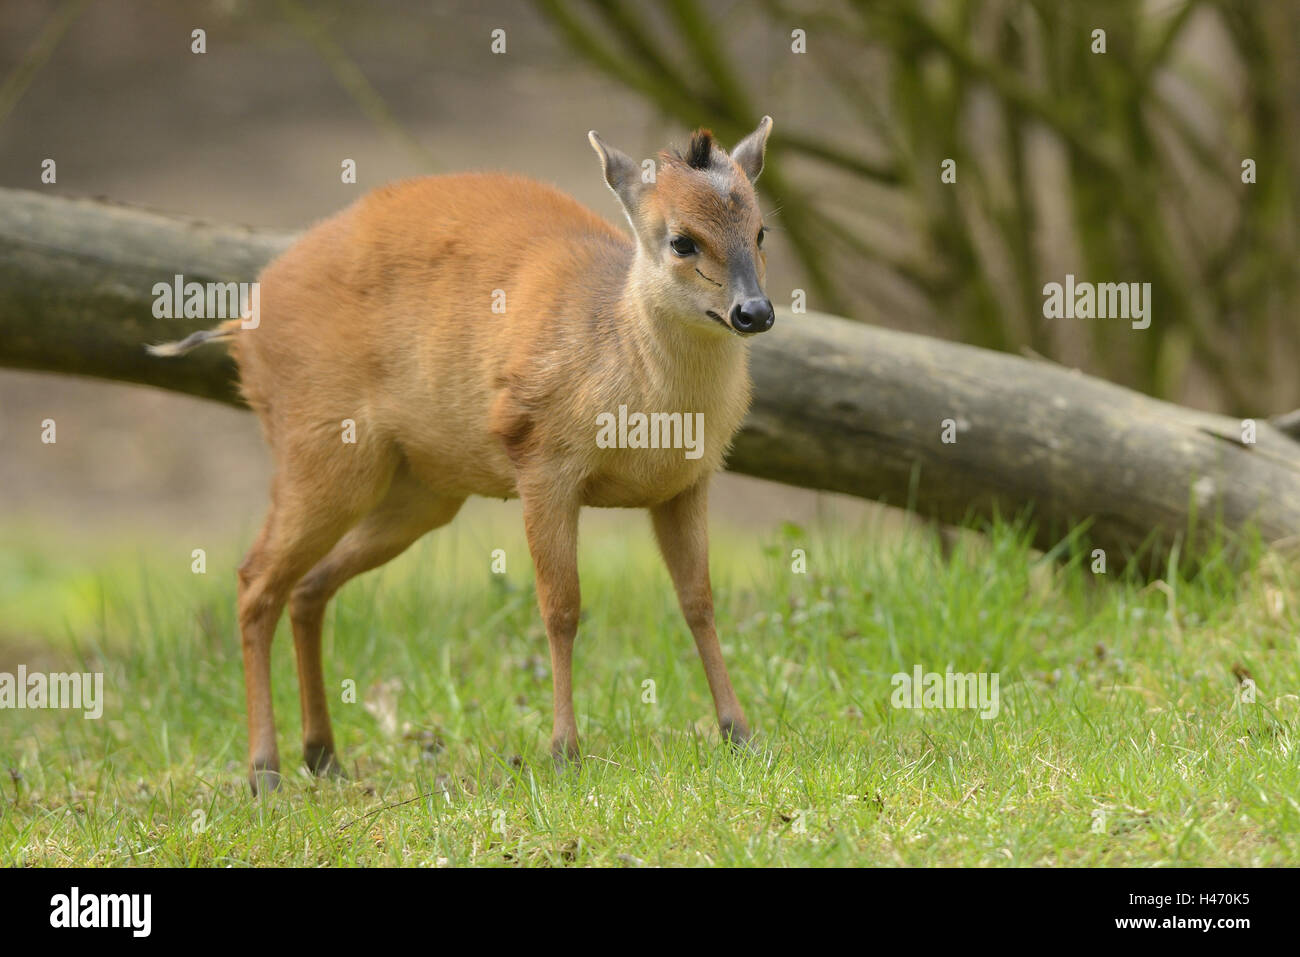 Red forest duiker, Cephalophus natalensis, standing, Stock Photo